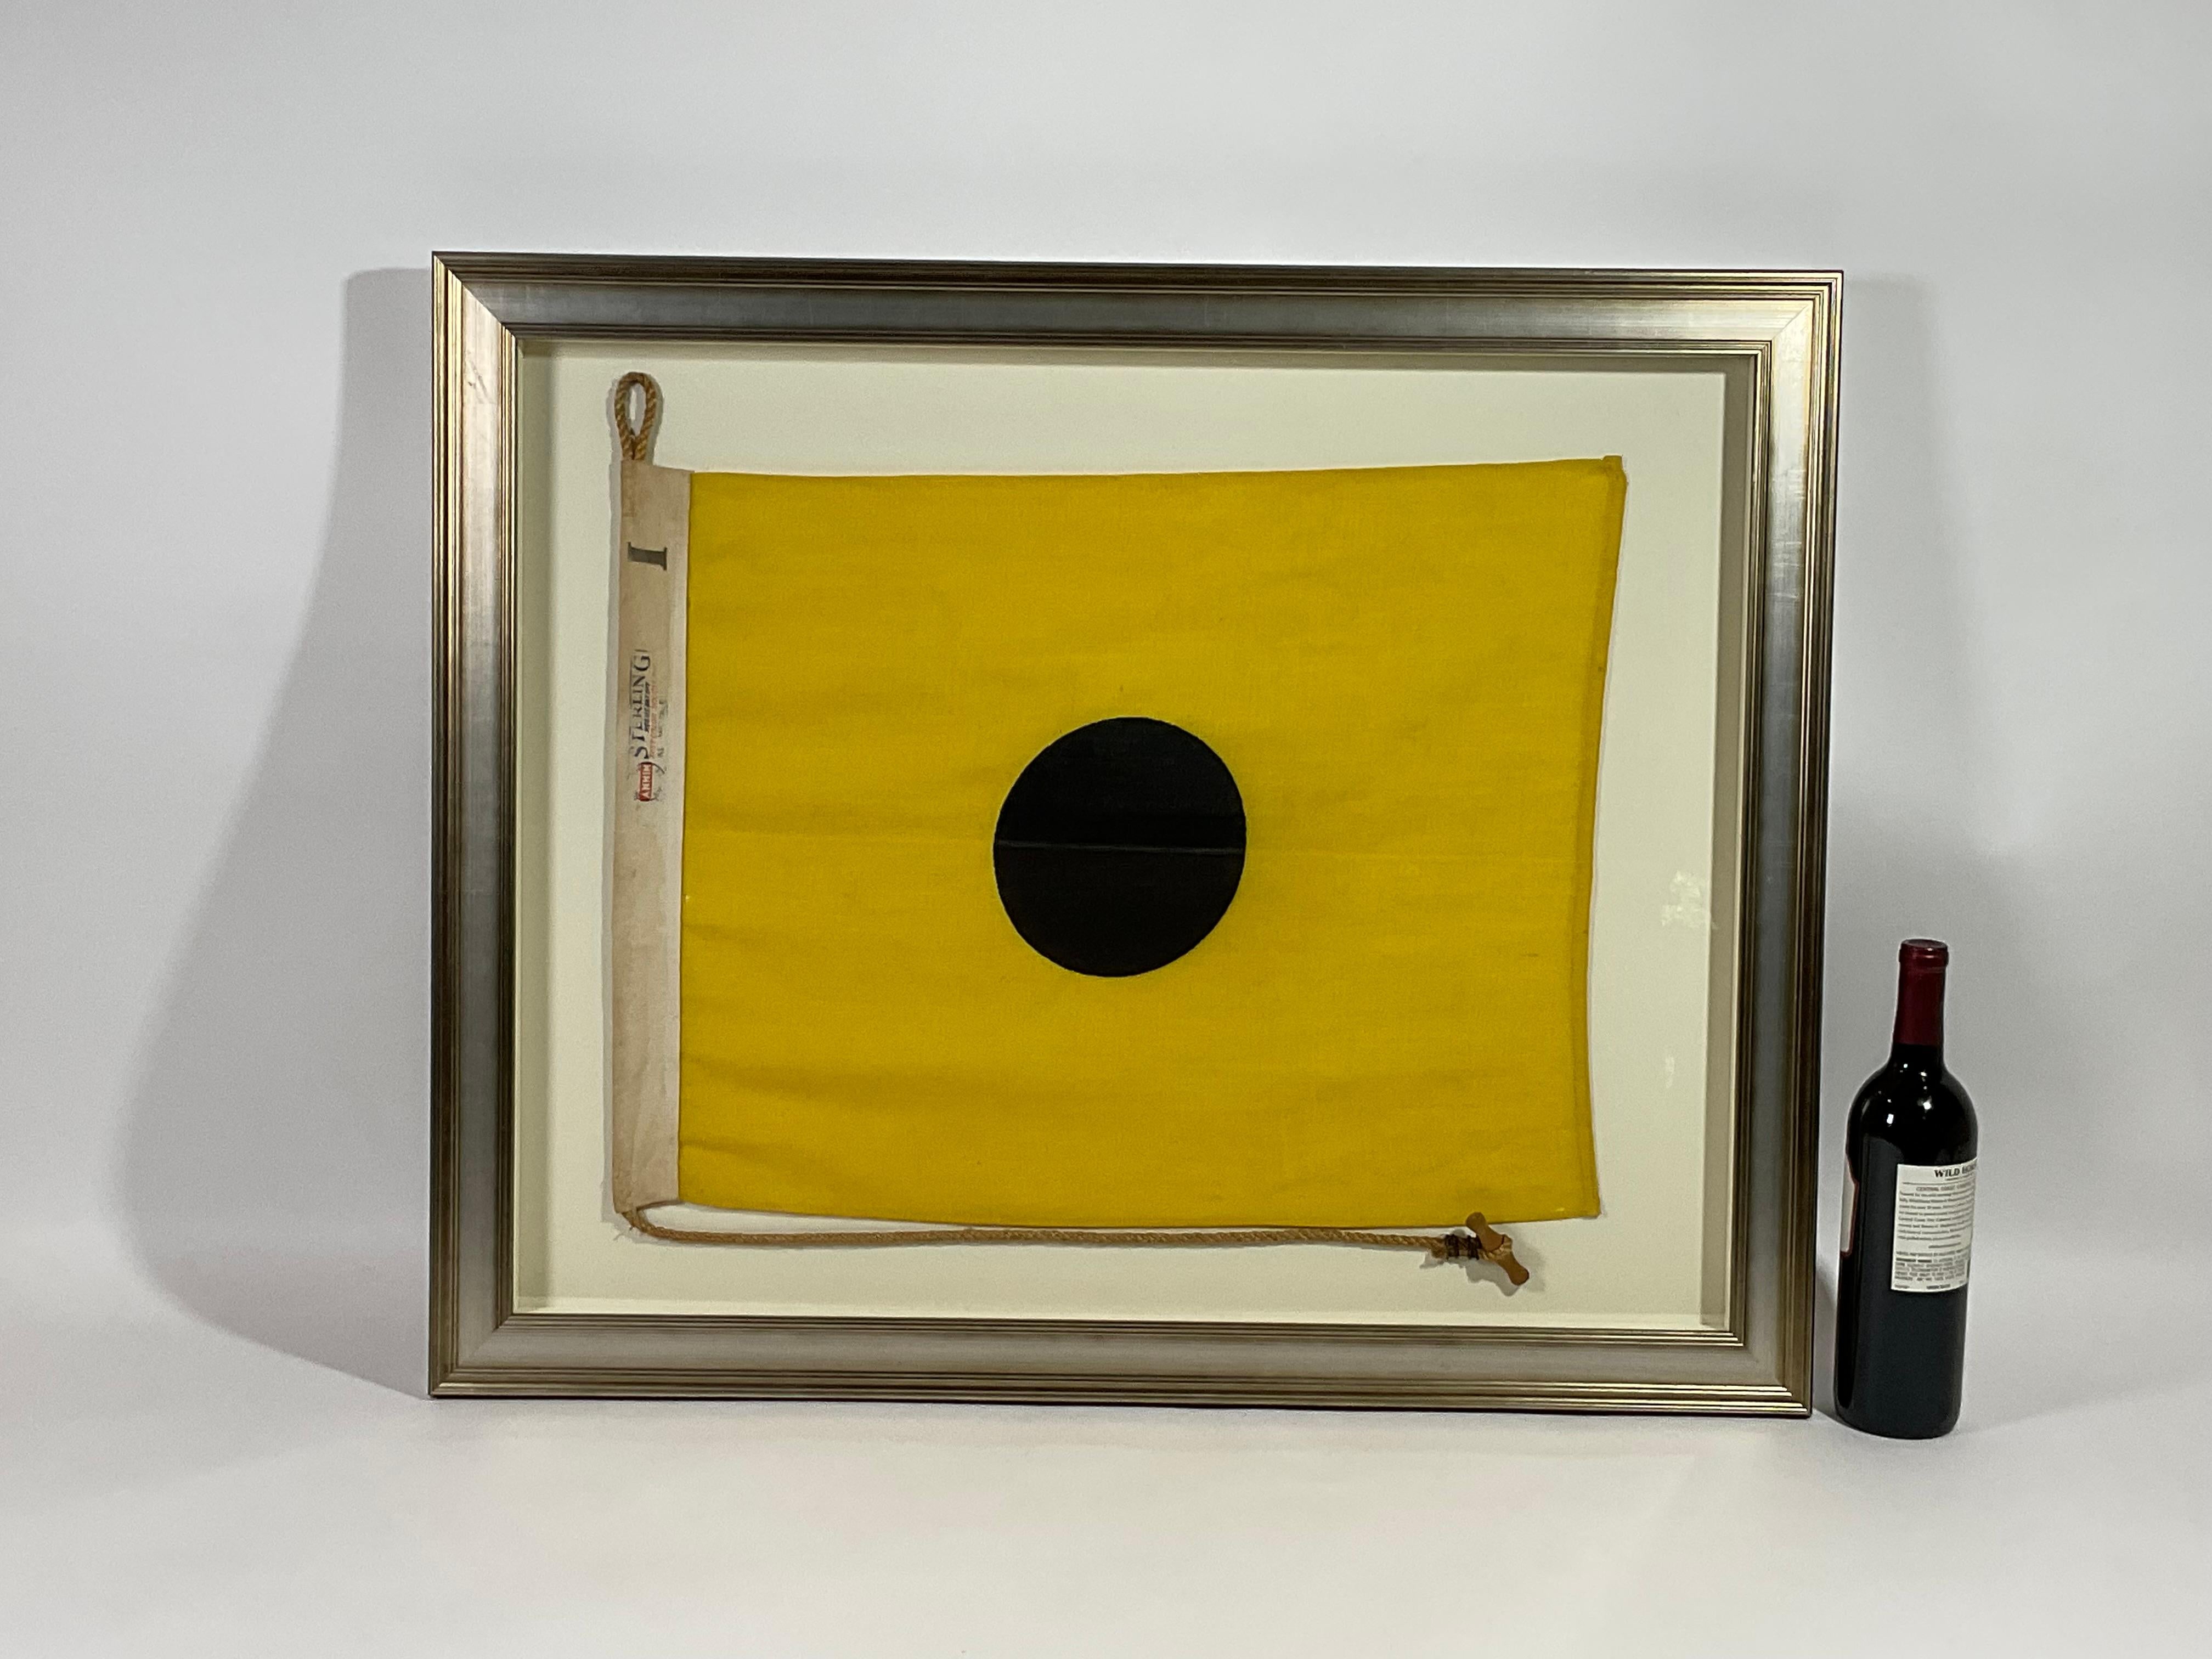 Framed maritime signal flag representing the letter “I”, “INDIA” in the international code of signals. This authentic and ocean used pennant is made of individual panels of yellow and black. Fitted to a heavy canvas hoist band with original rope and